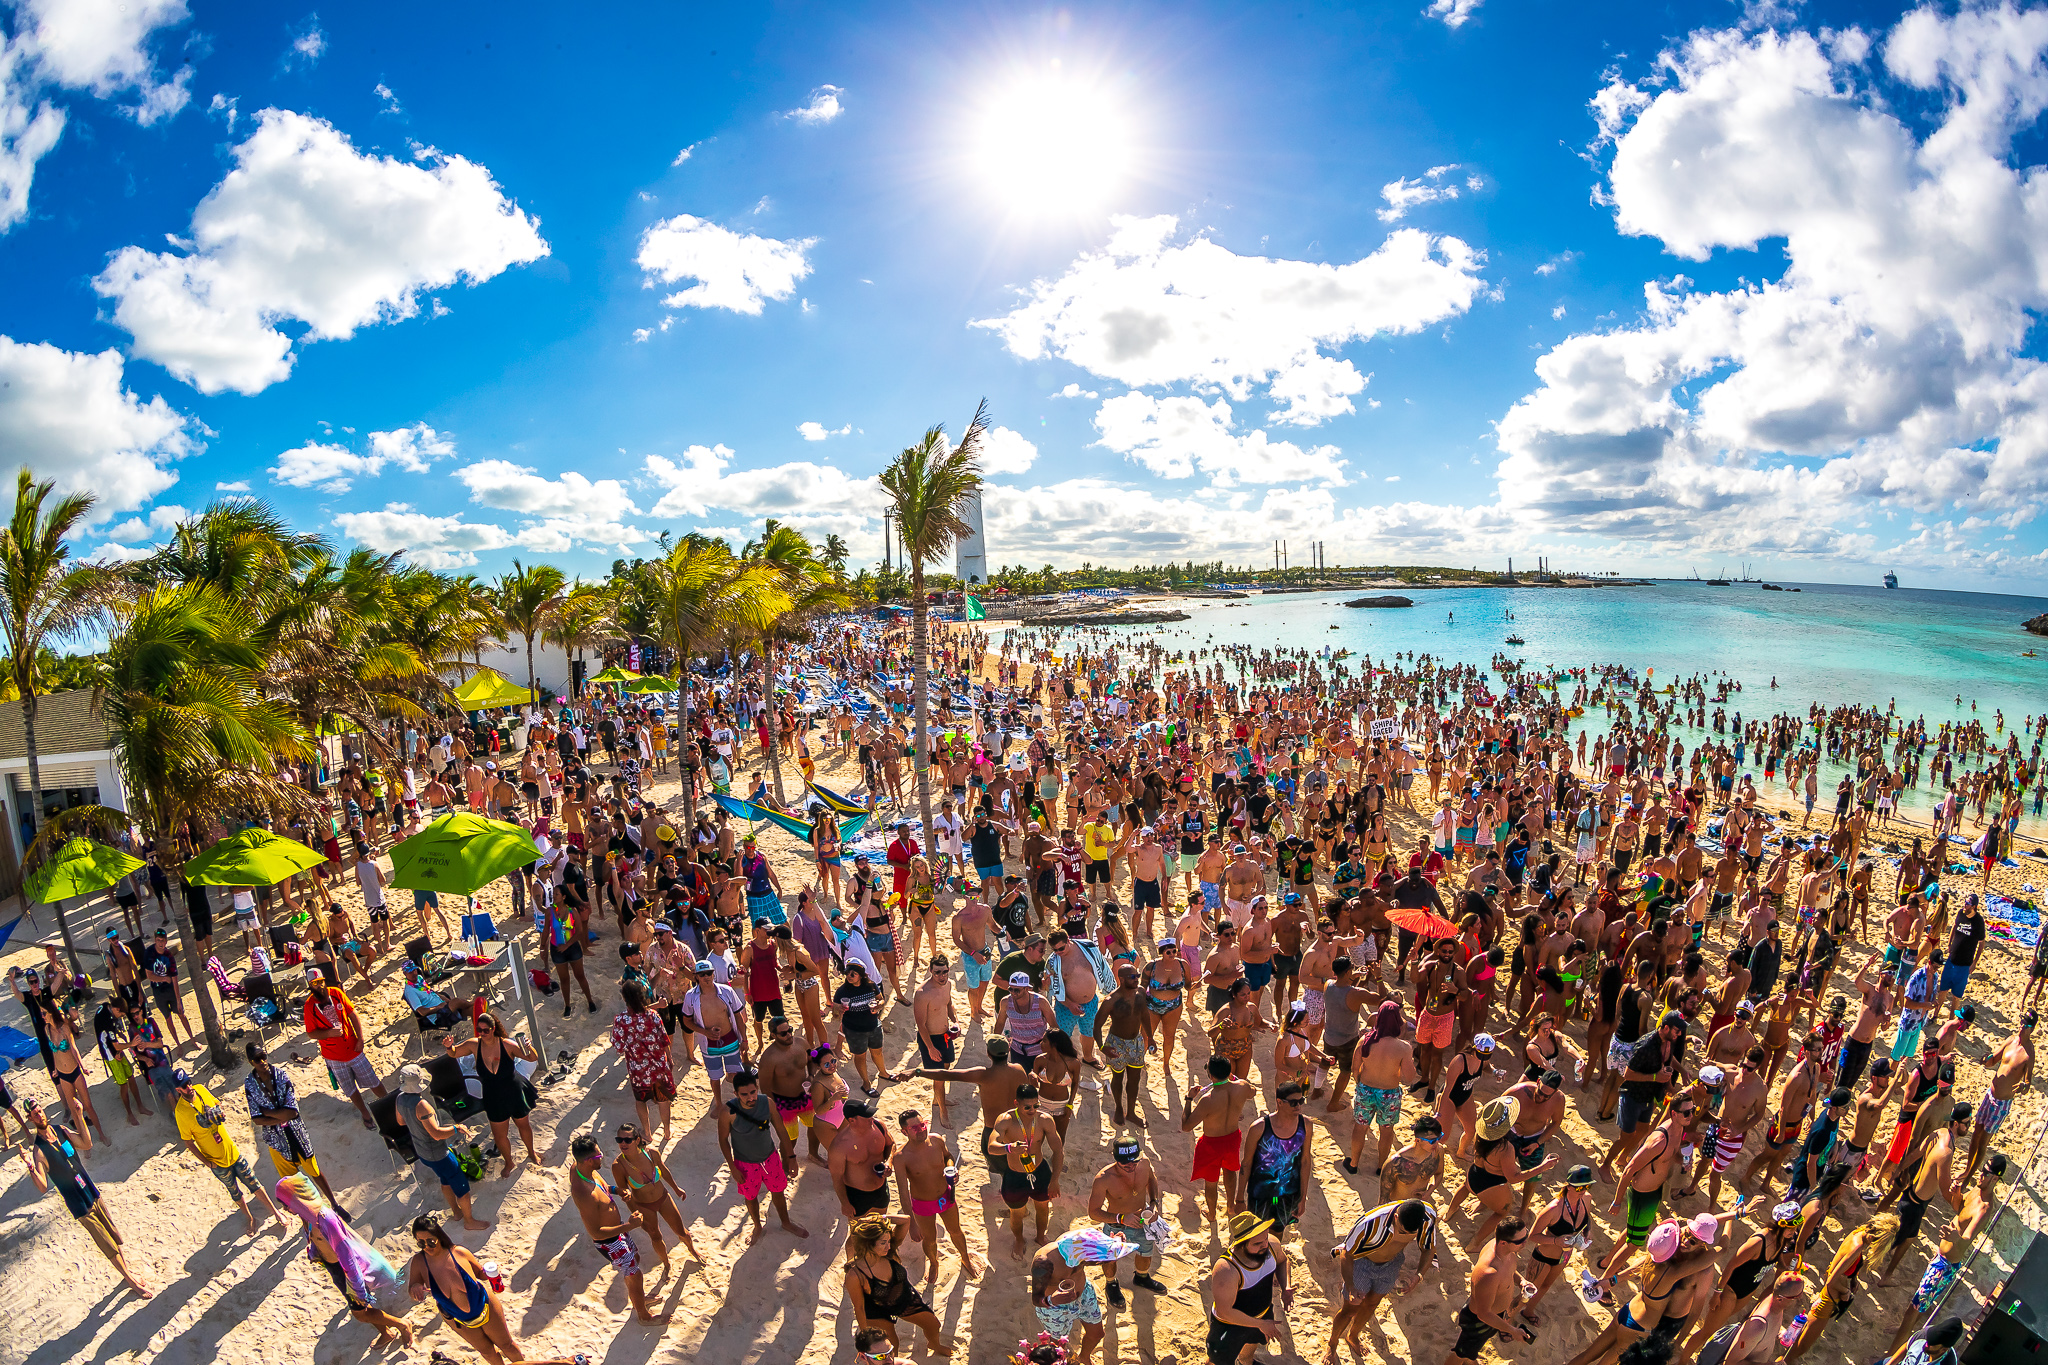 Holy Ship! Releases Line-Up For New Holy Ship! Wrecked Event Feat. Diplo, A-Trak, and Many More